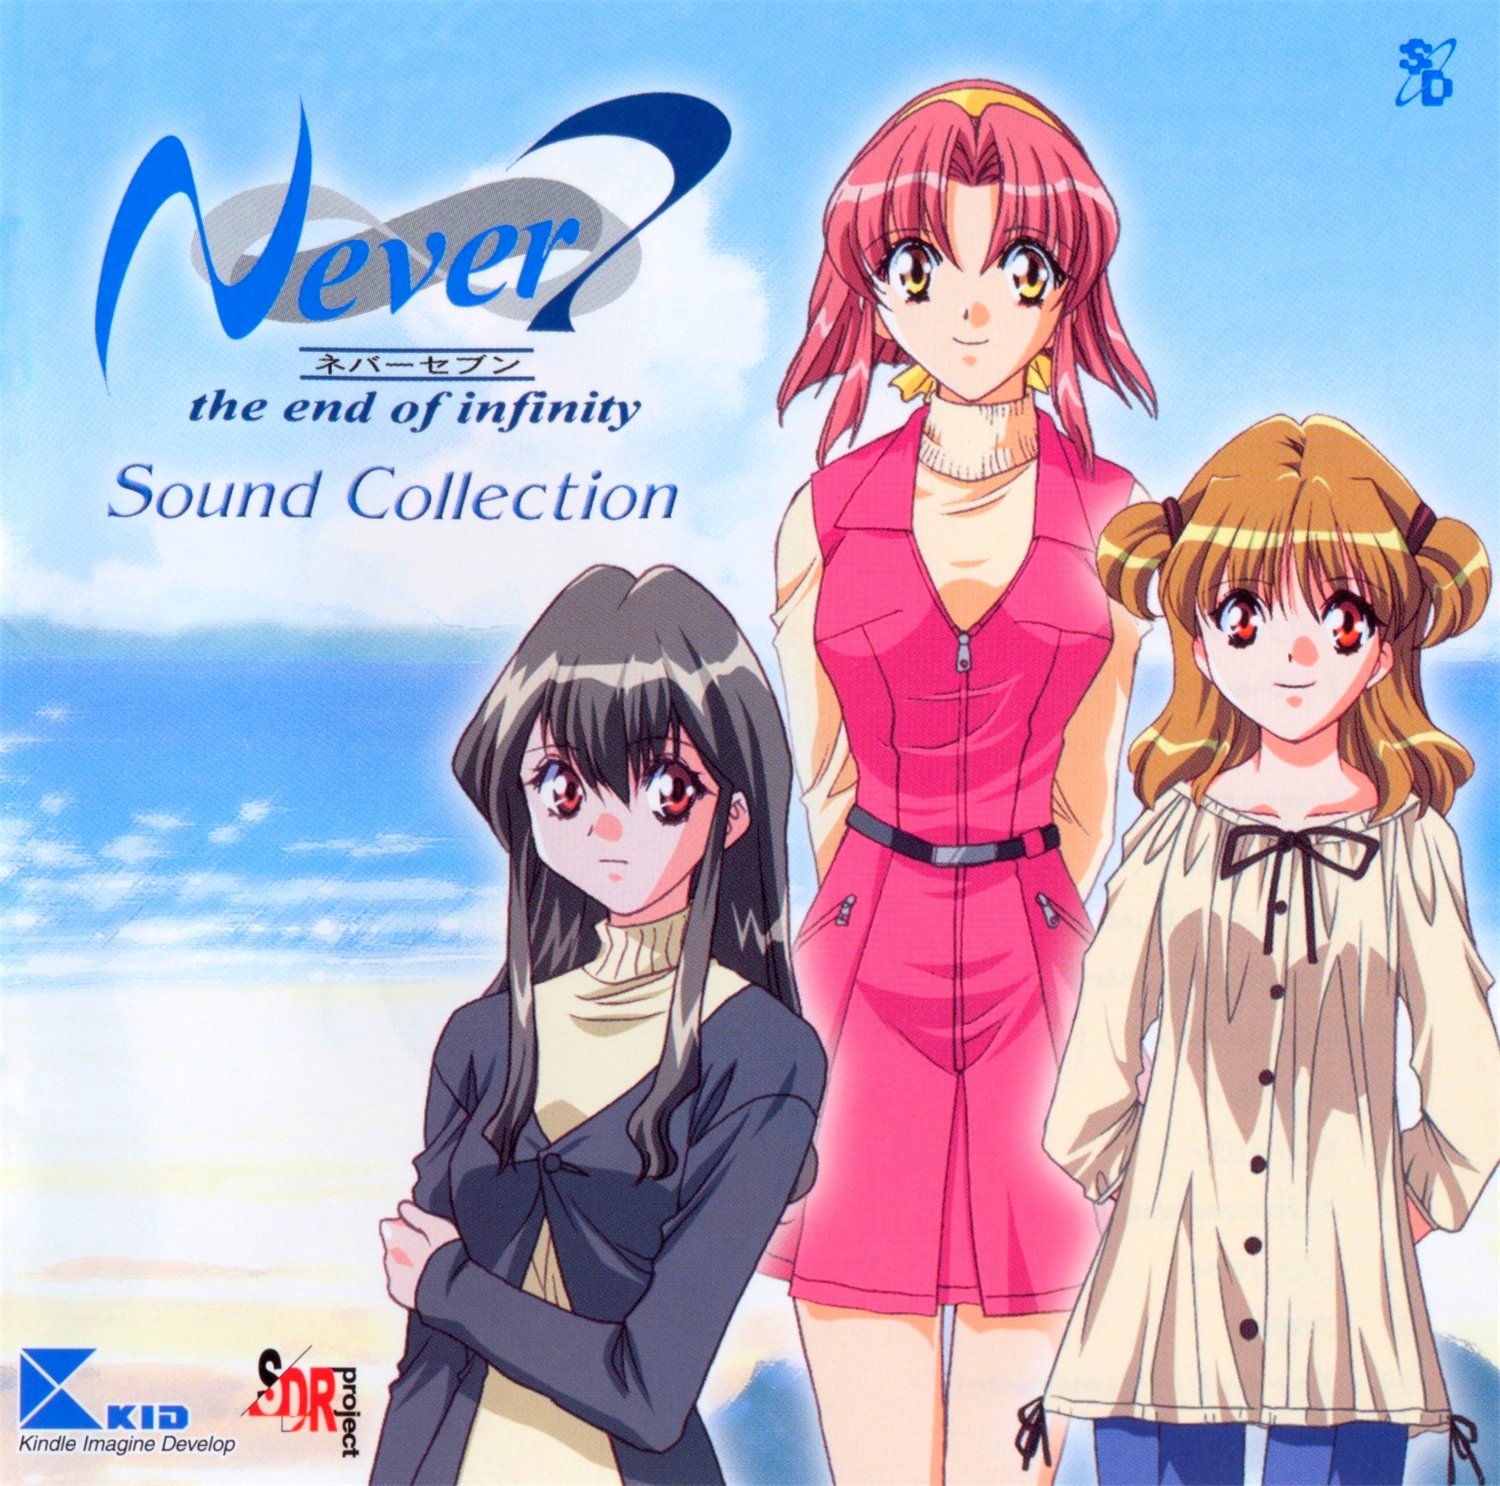 【WAV】ゲーム「Never7 -the end of infinity-」Sound Collection／阿保剛